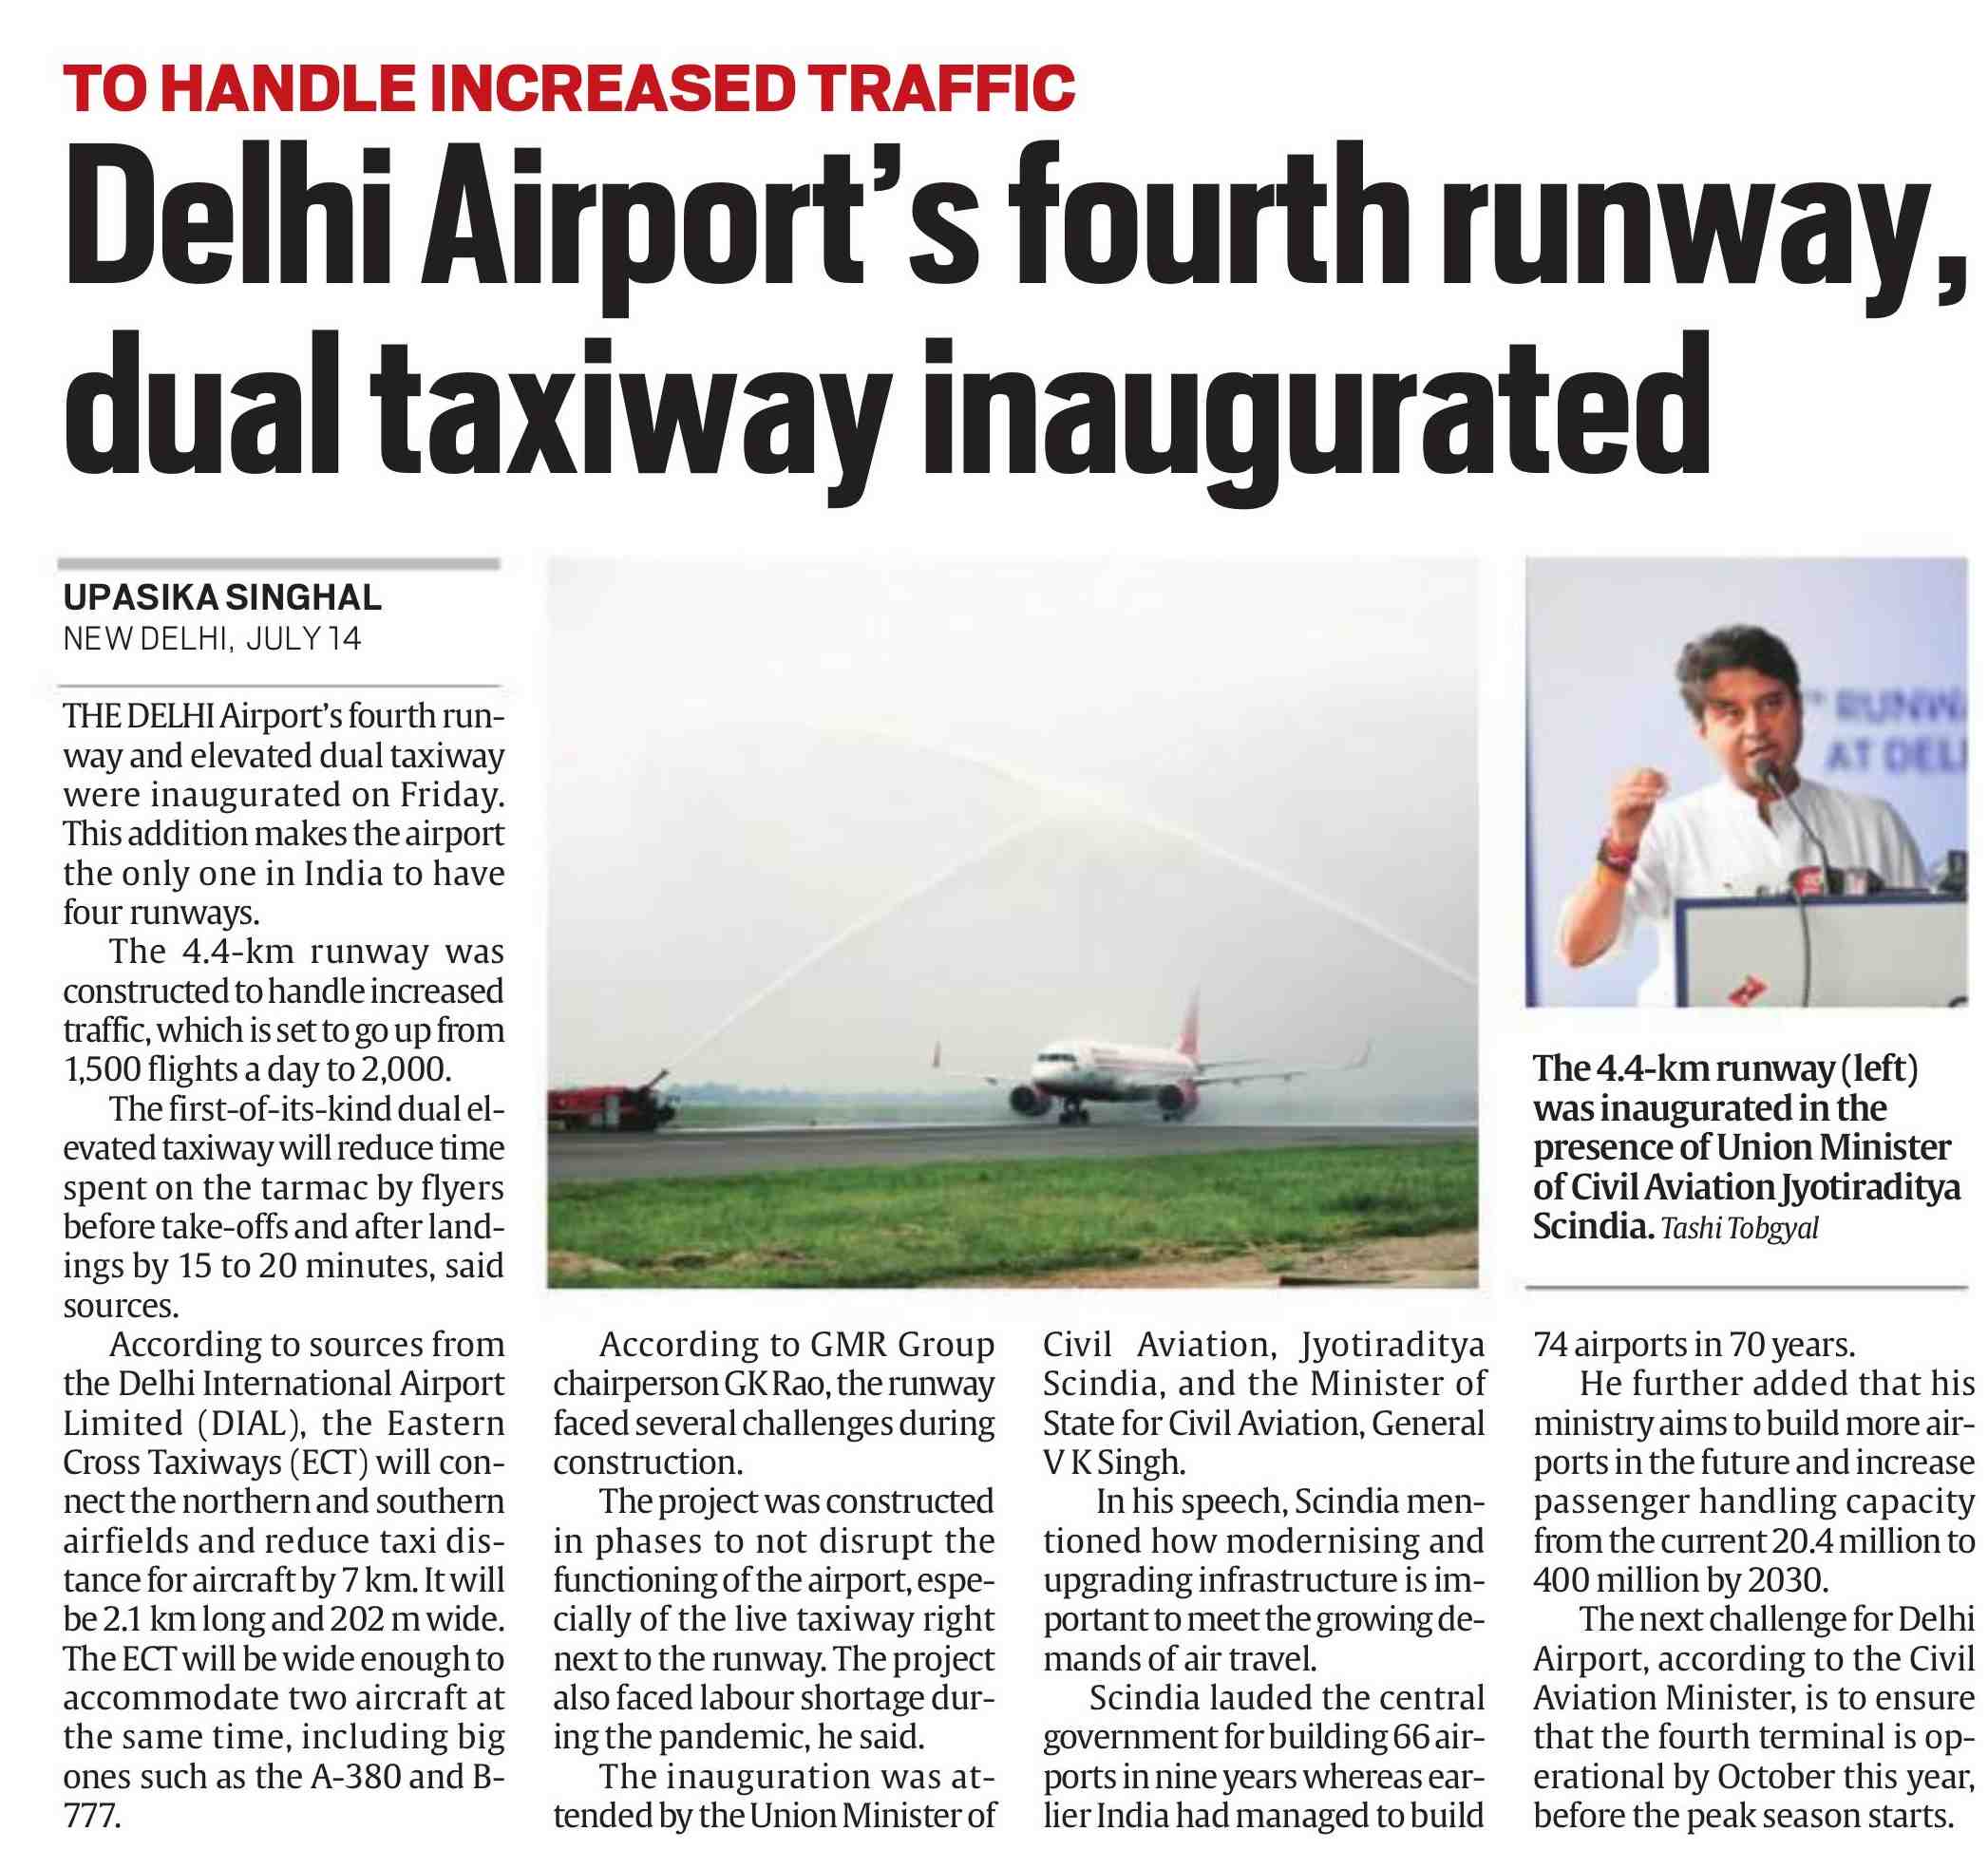 Delhi airport's fourth runway dual taxiway